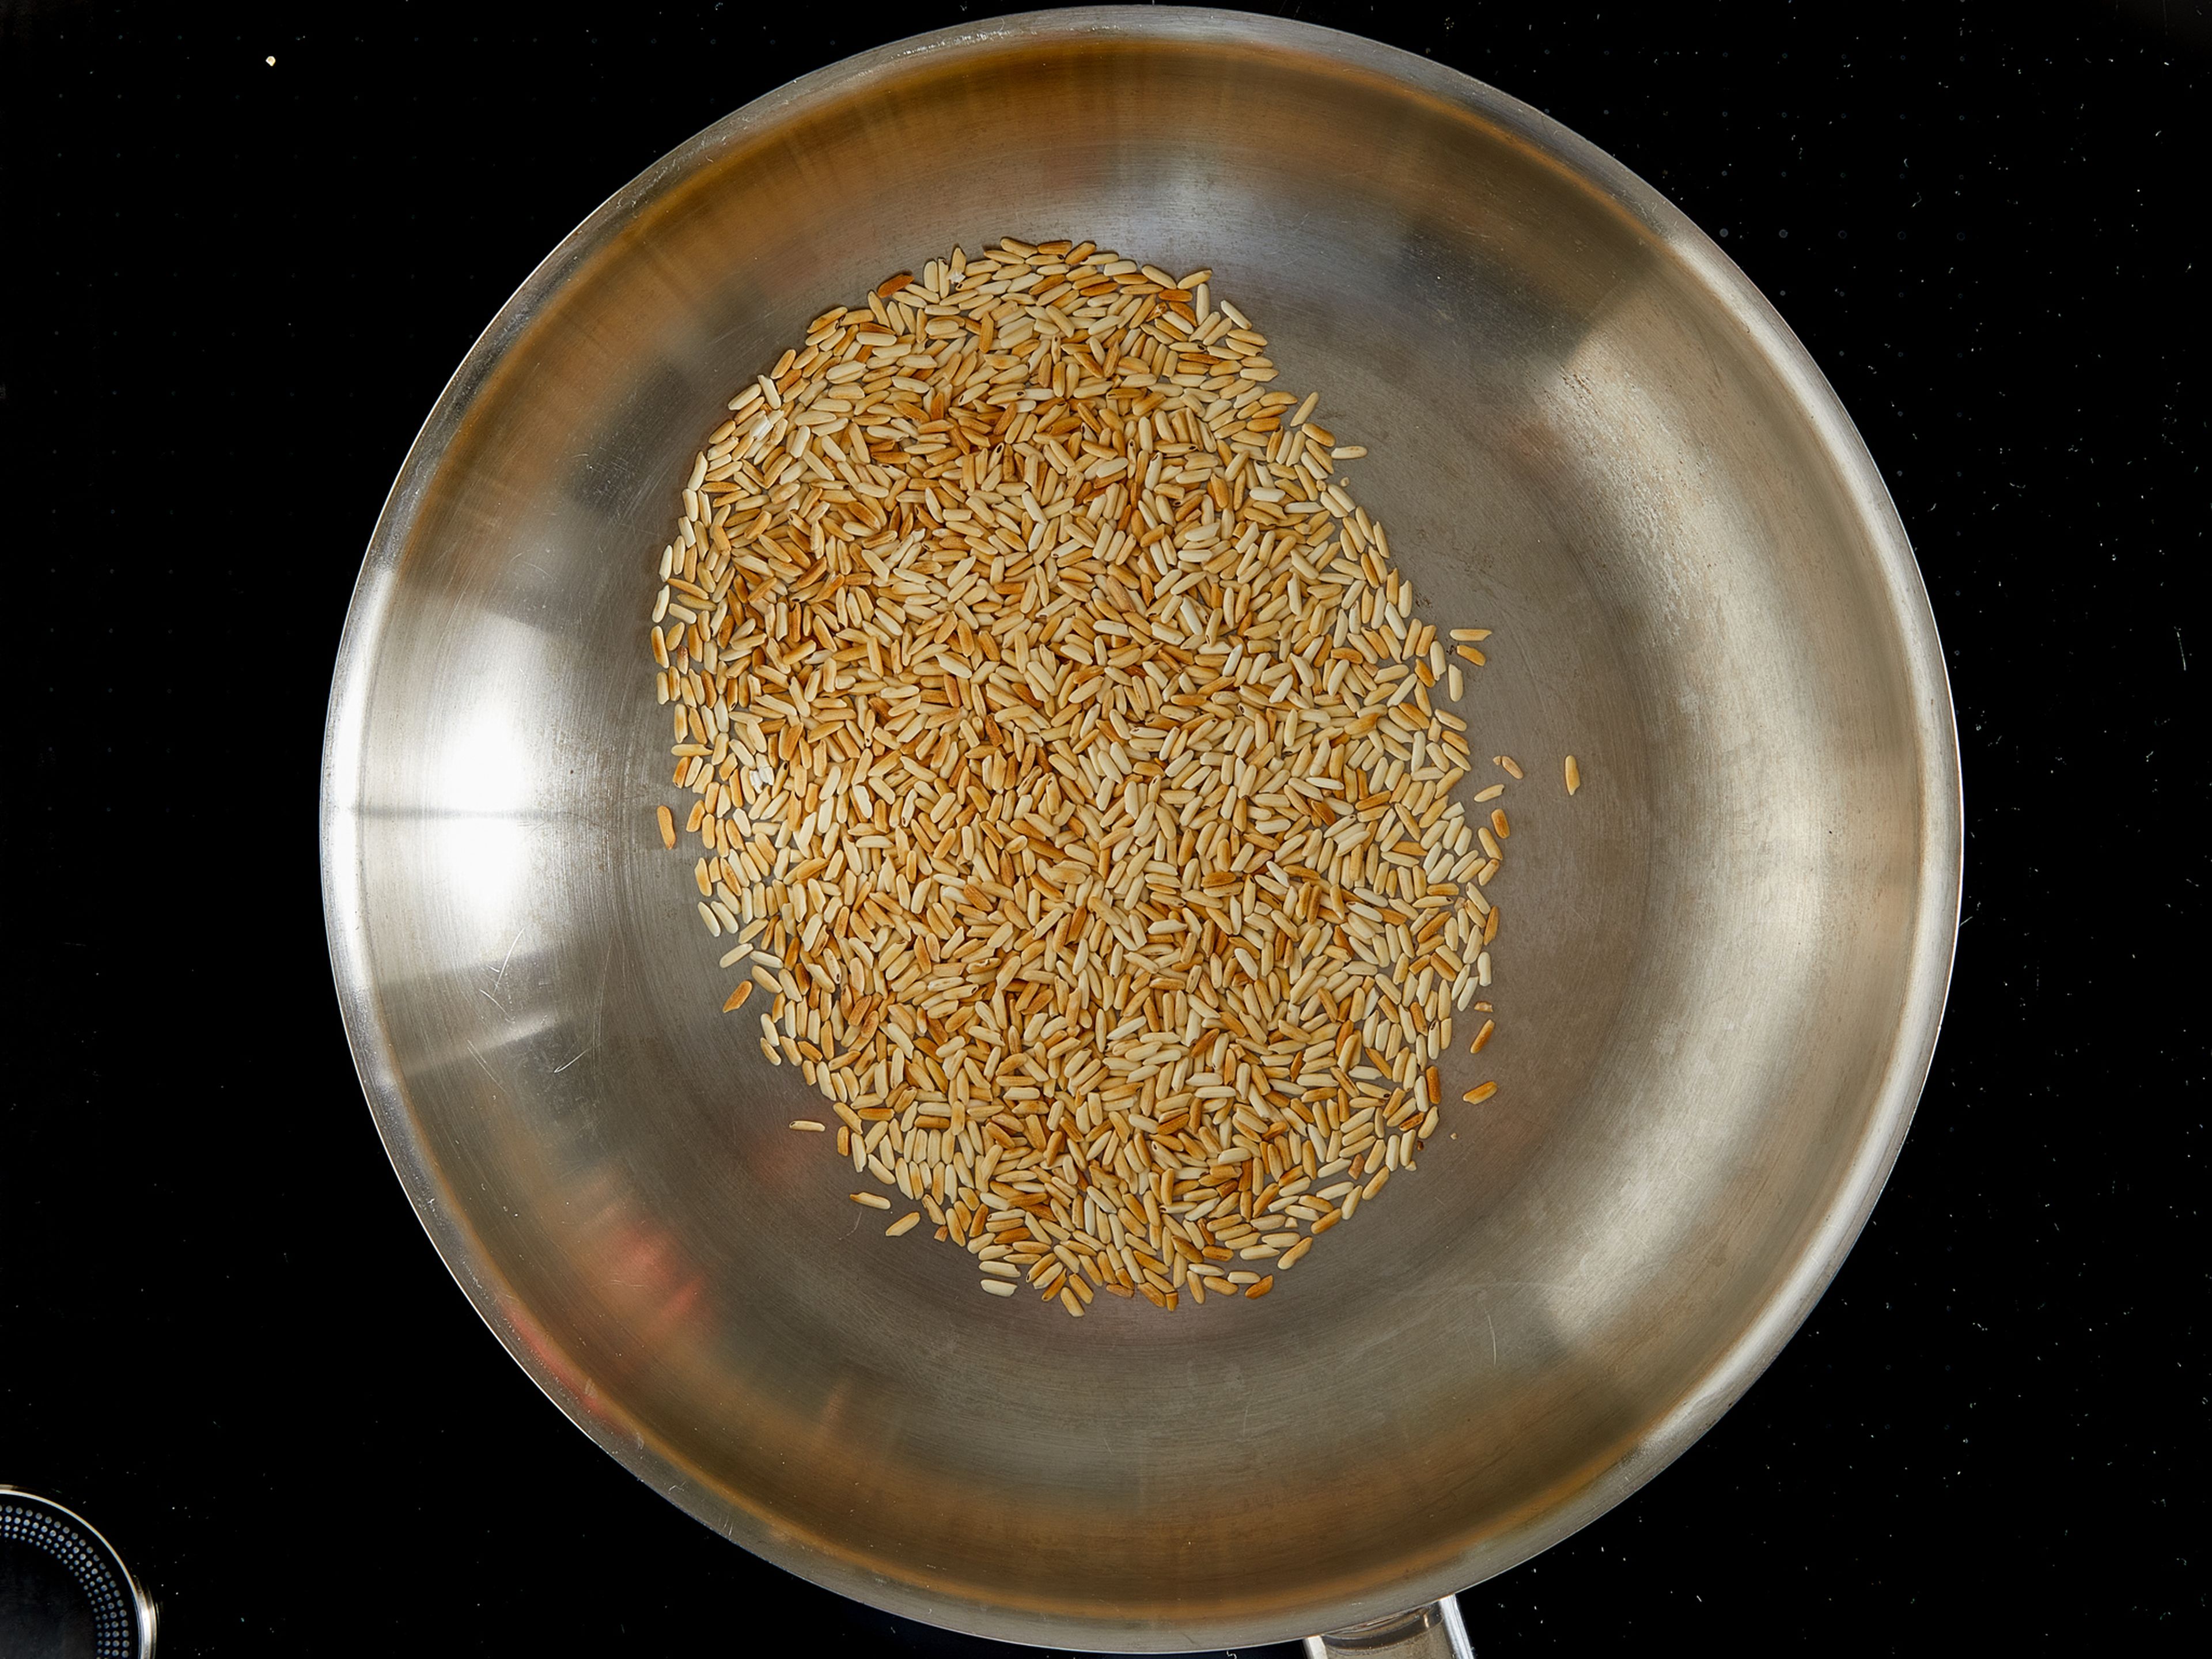 For the toasted rice powder, heat a dry frying pan over medium-high heat. Add the rice and roast, stirring or tossing occasionally, for approx. 10 min. until golden brown and it takes on a nutty aroma. Let cool down. Then put the rice into a food processor or spice grinder and grind until it is still a coarse but not too fine powder, then set aside.